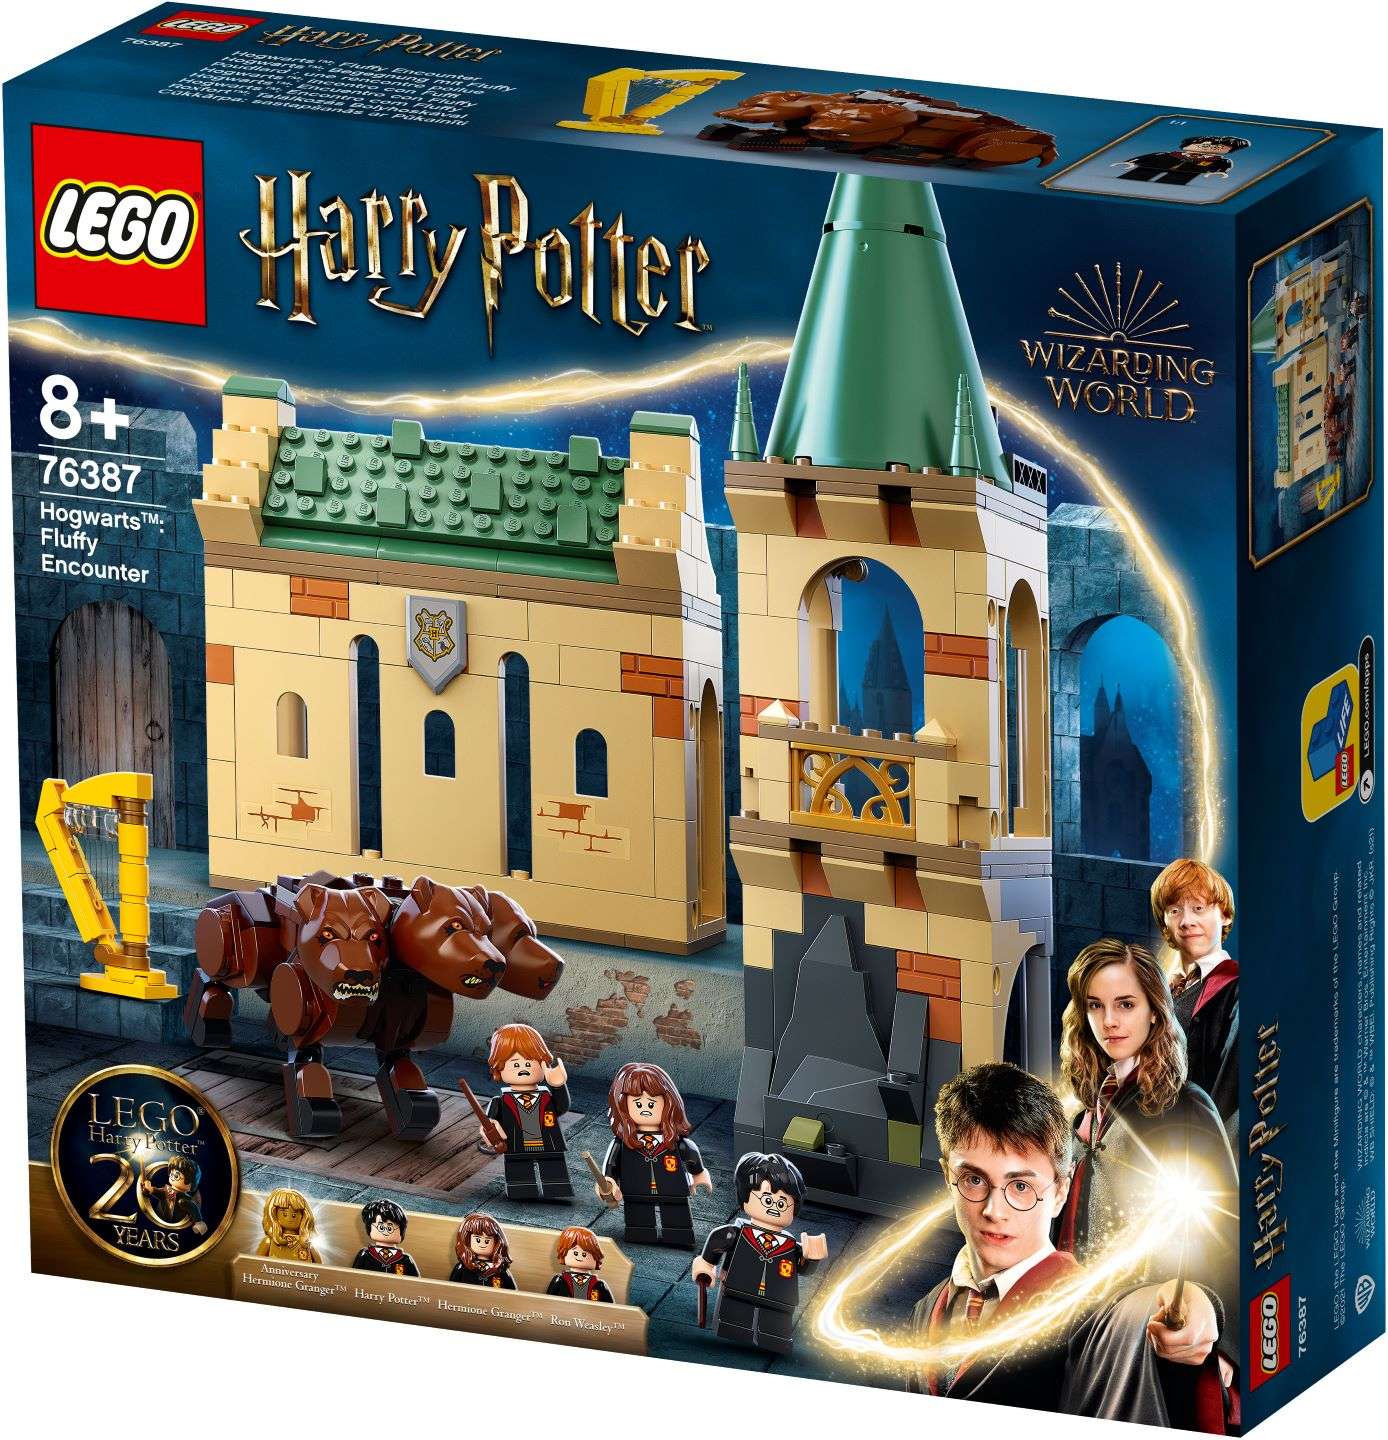 2021 LEGO Harry Potter sets officially revealed ...